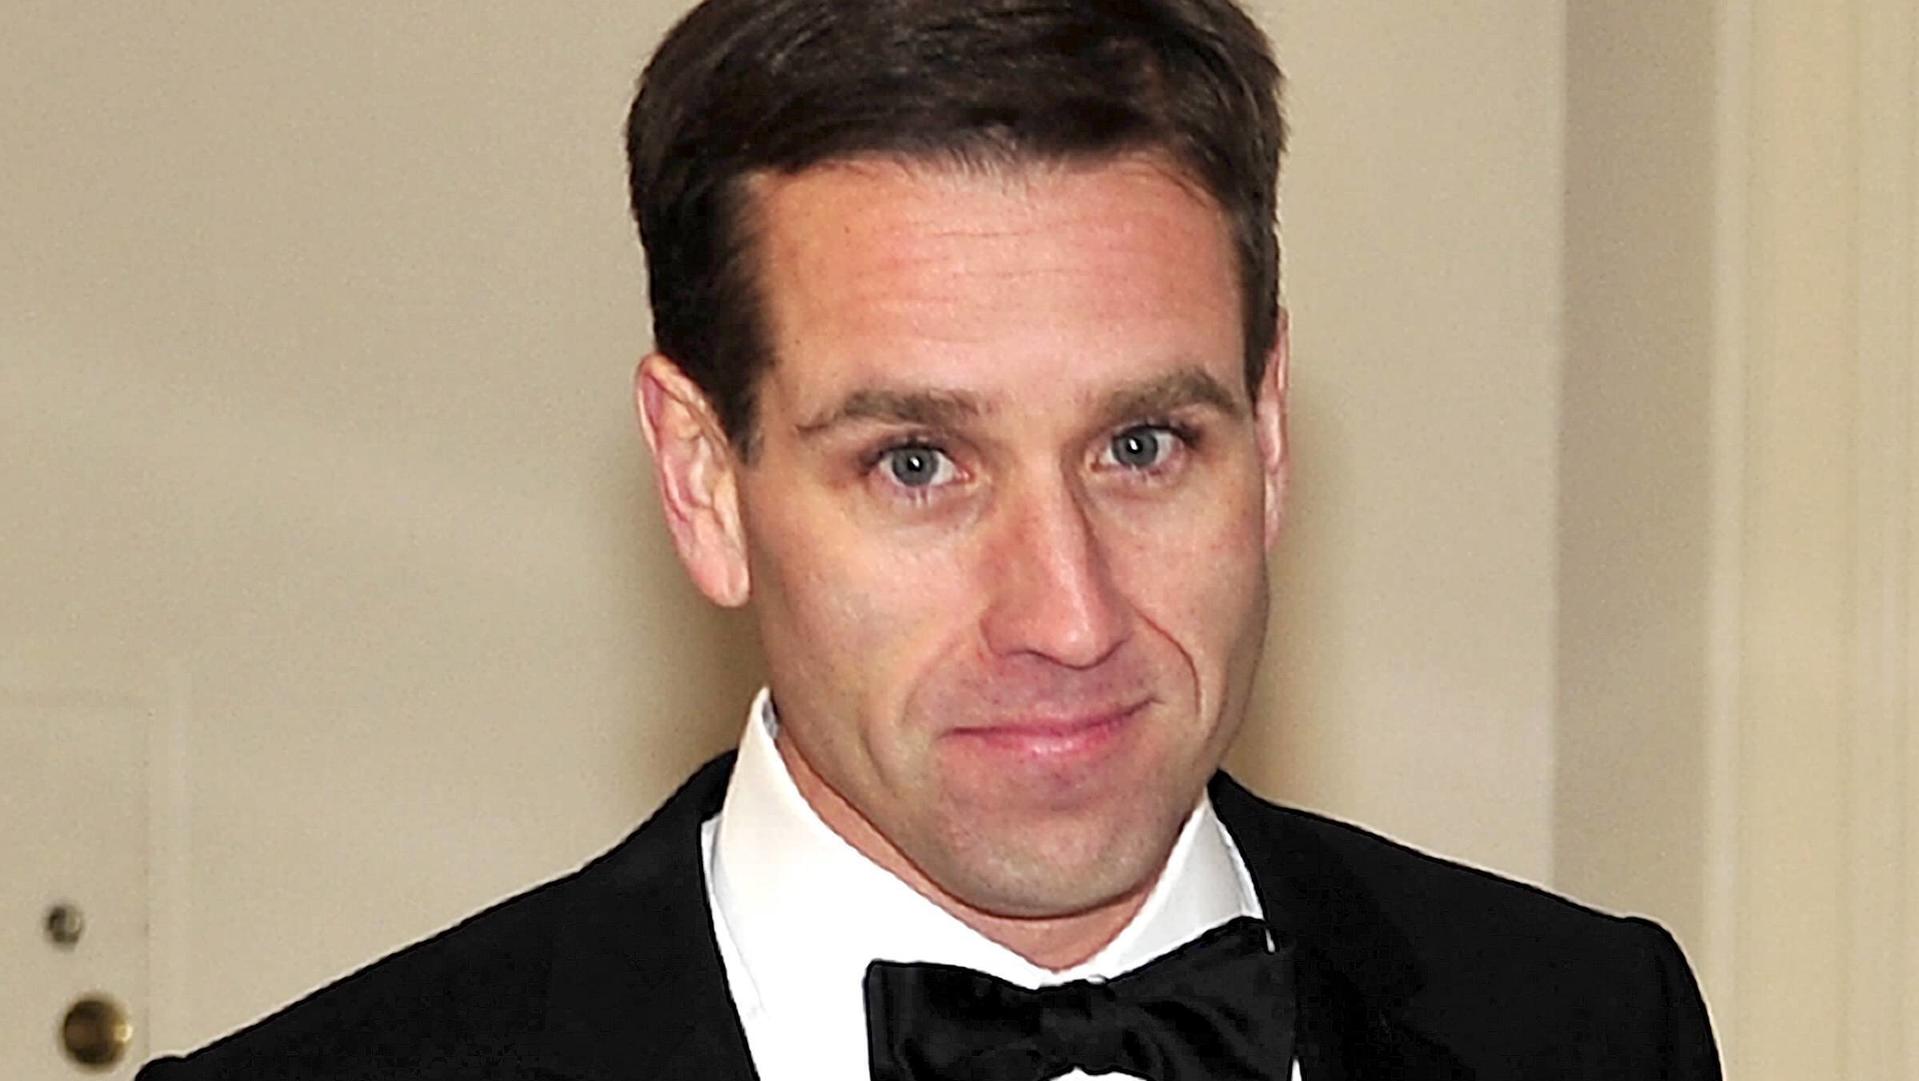  January 19, 2011 - Washington, District of Columbia, United States of America - Joseph Beau Biden, III, Attorney General of Delaware arrives for the State Dinner in honor of President Hu Jintao of China at the White House In Washington, D.C. on Wedn